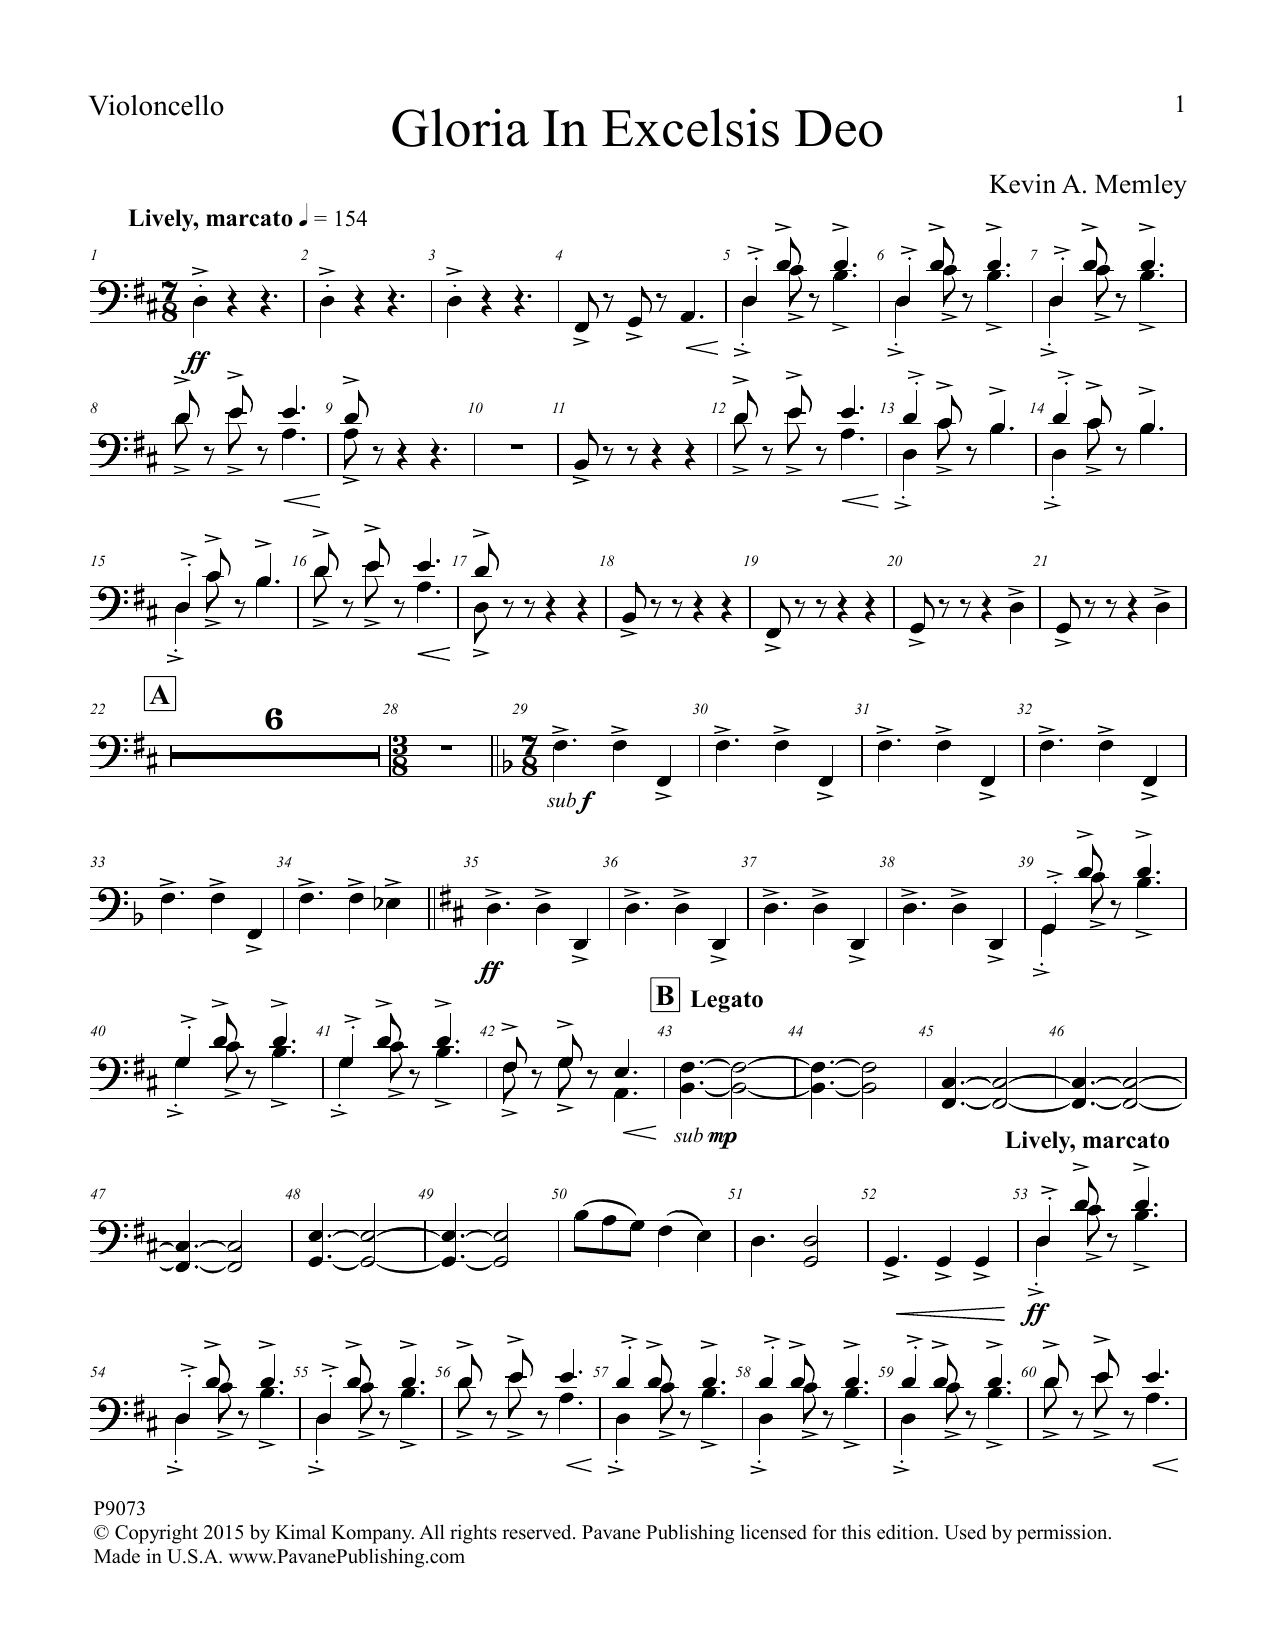 Download Kevin A. Memley Gloria in Excelsis Deo - Violoncello Sheet Music